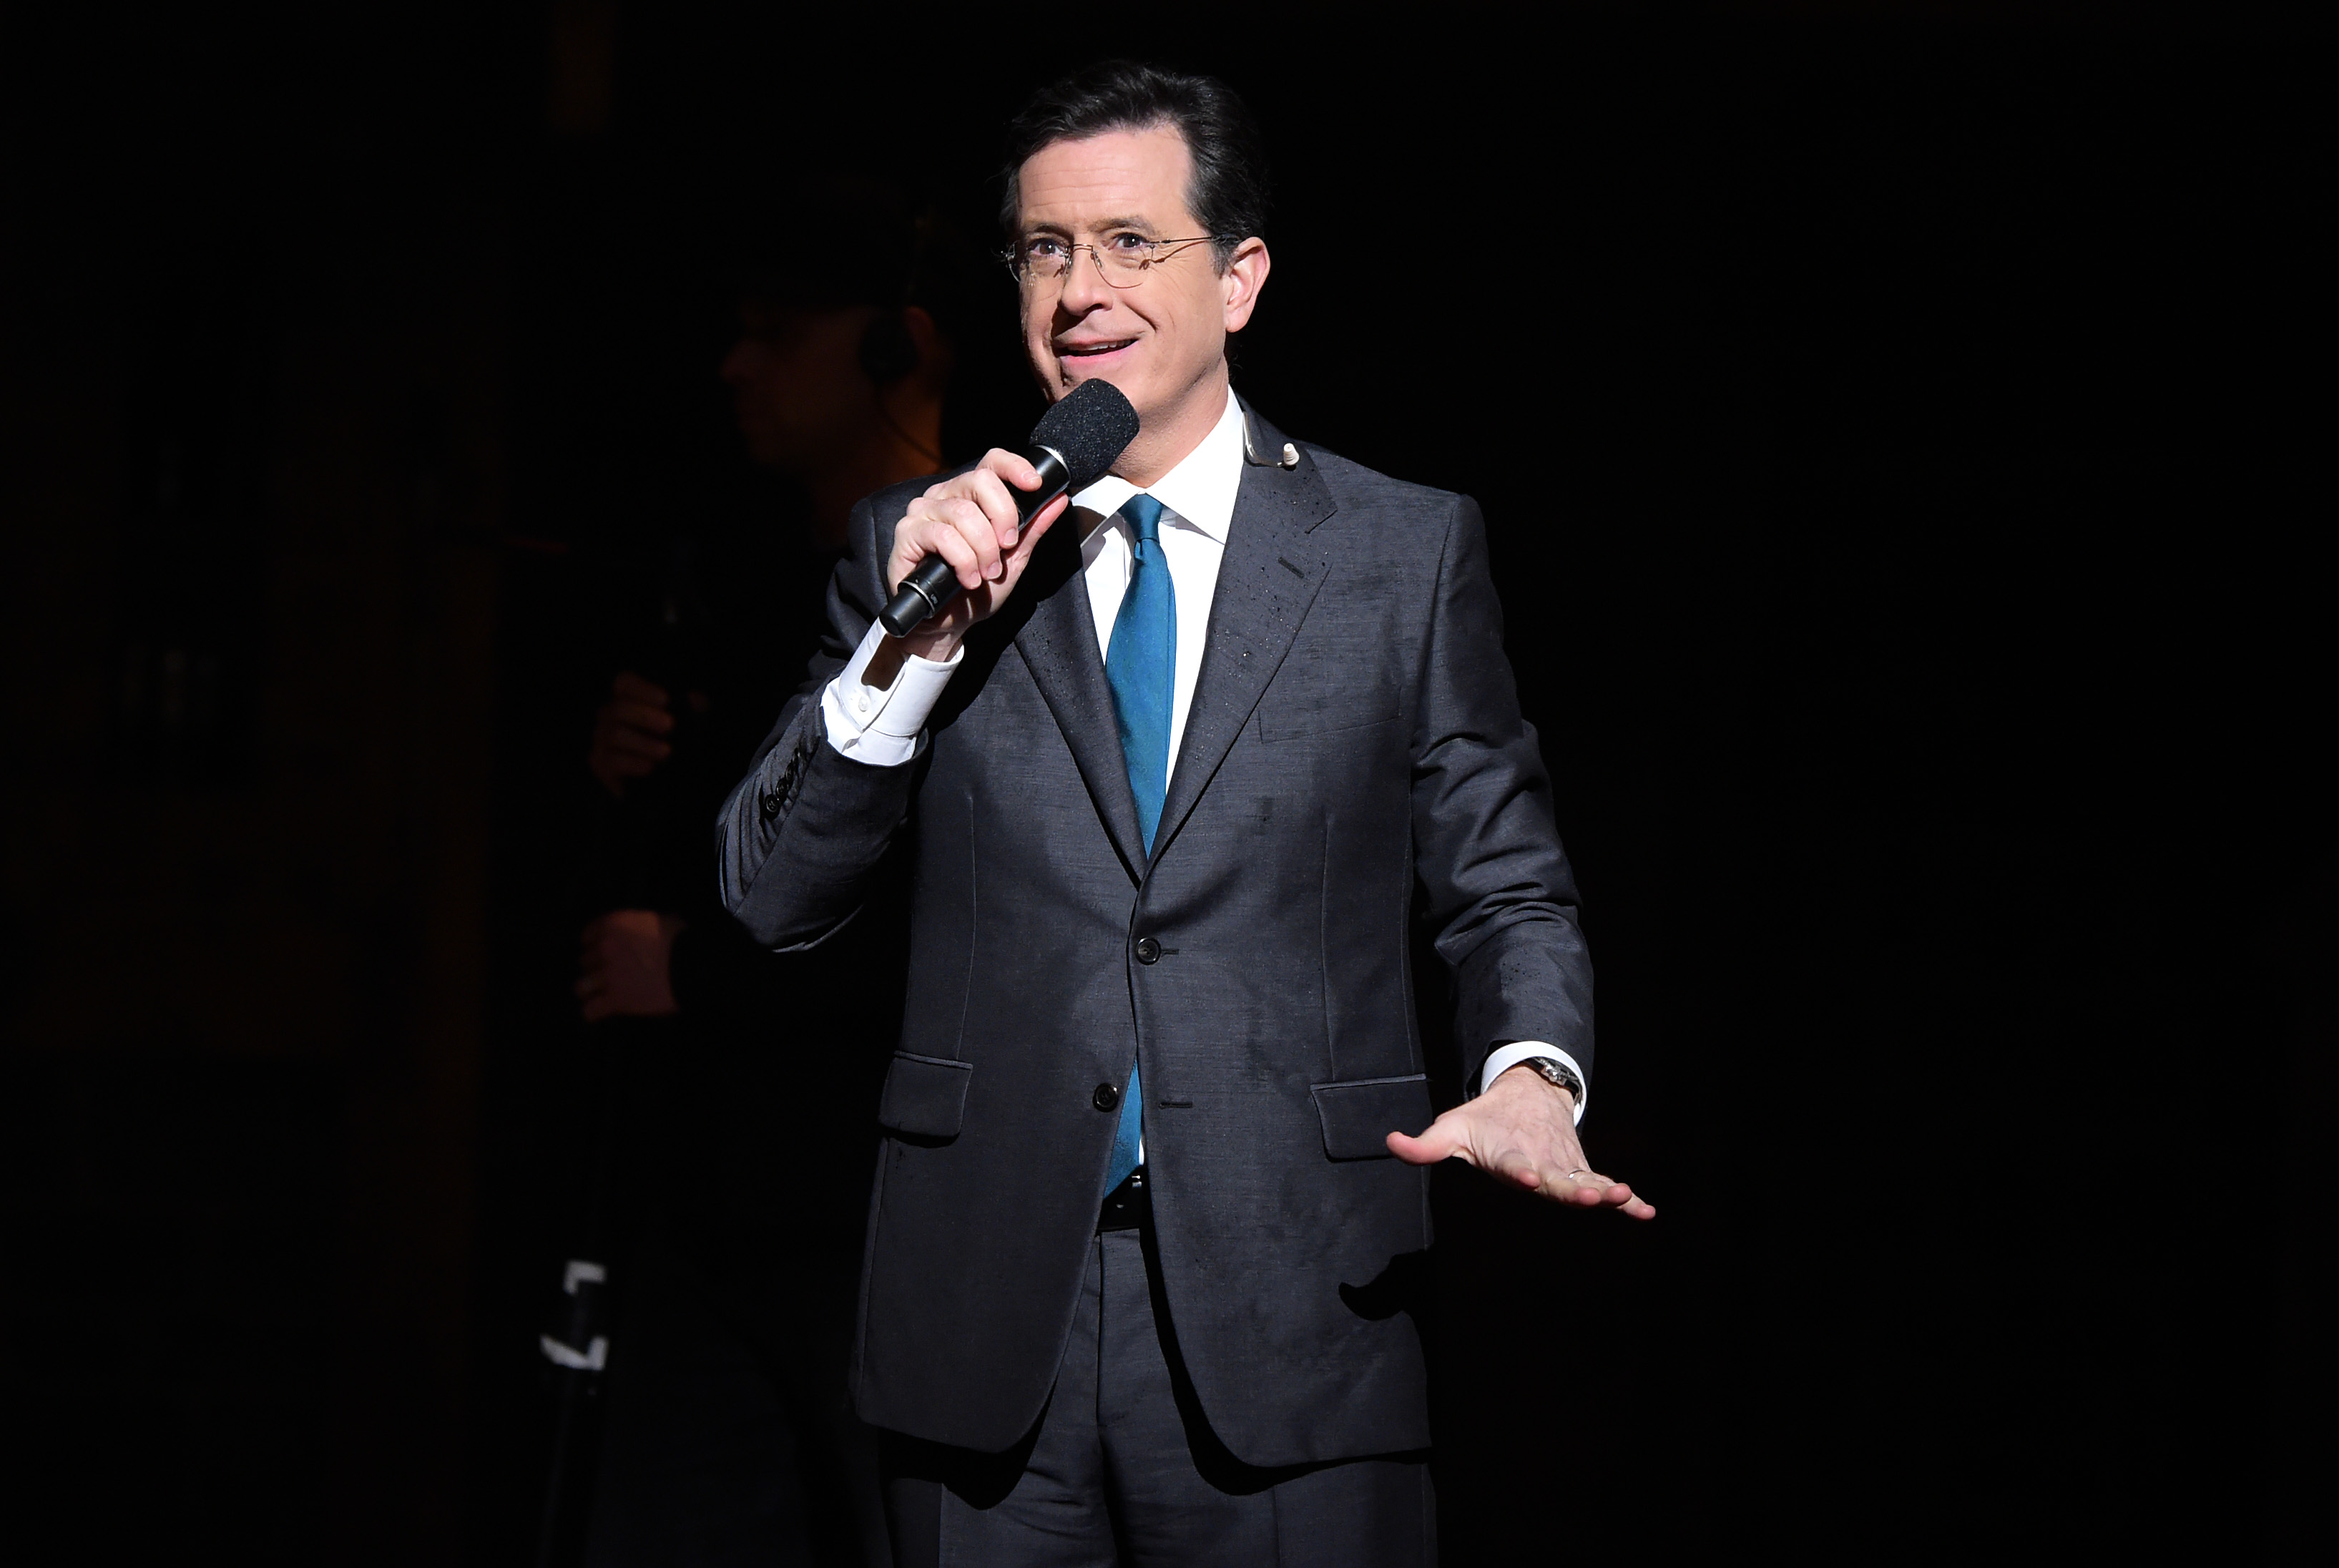 TV Host, comedian Stephen Colbert speaks on stage prior to "Hamilton" GRAMMY performance for The 58th GRAMMY Awards at Richard Rodgers Theater on February 15, 2016 in New York City. (Theo Wargo—WireImage/Getty)